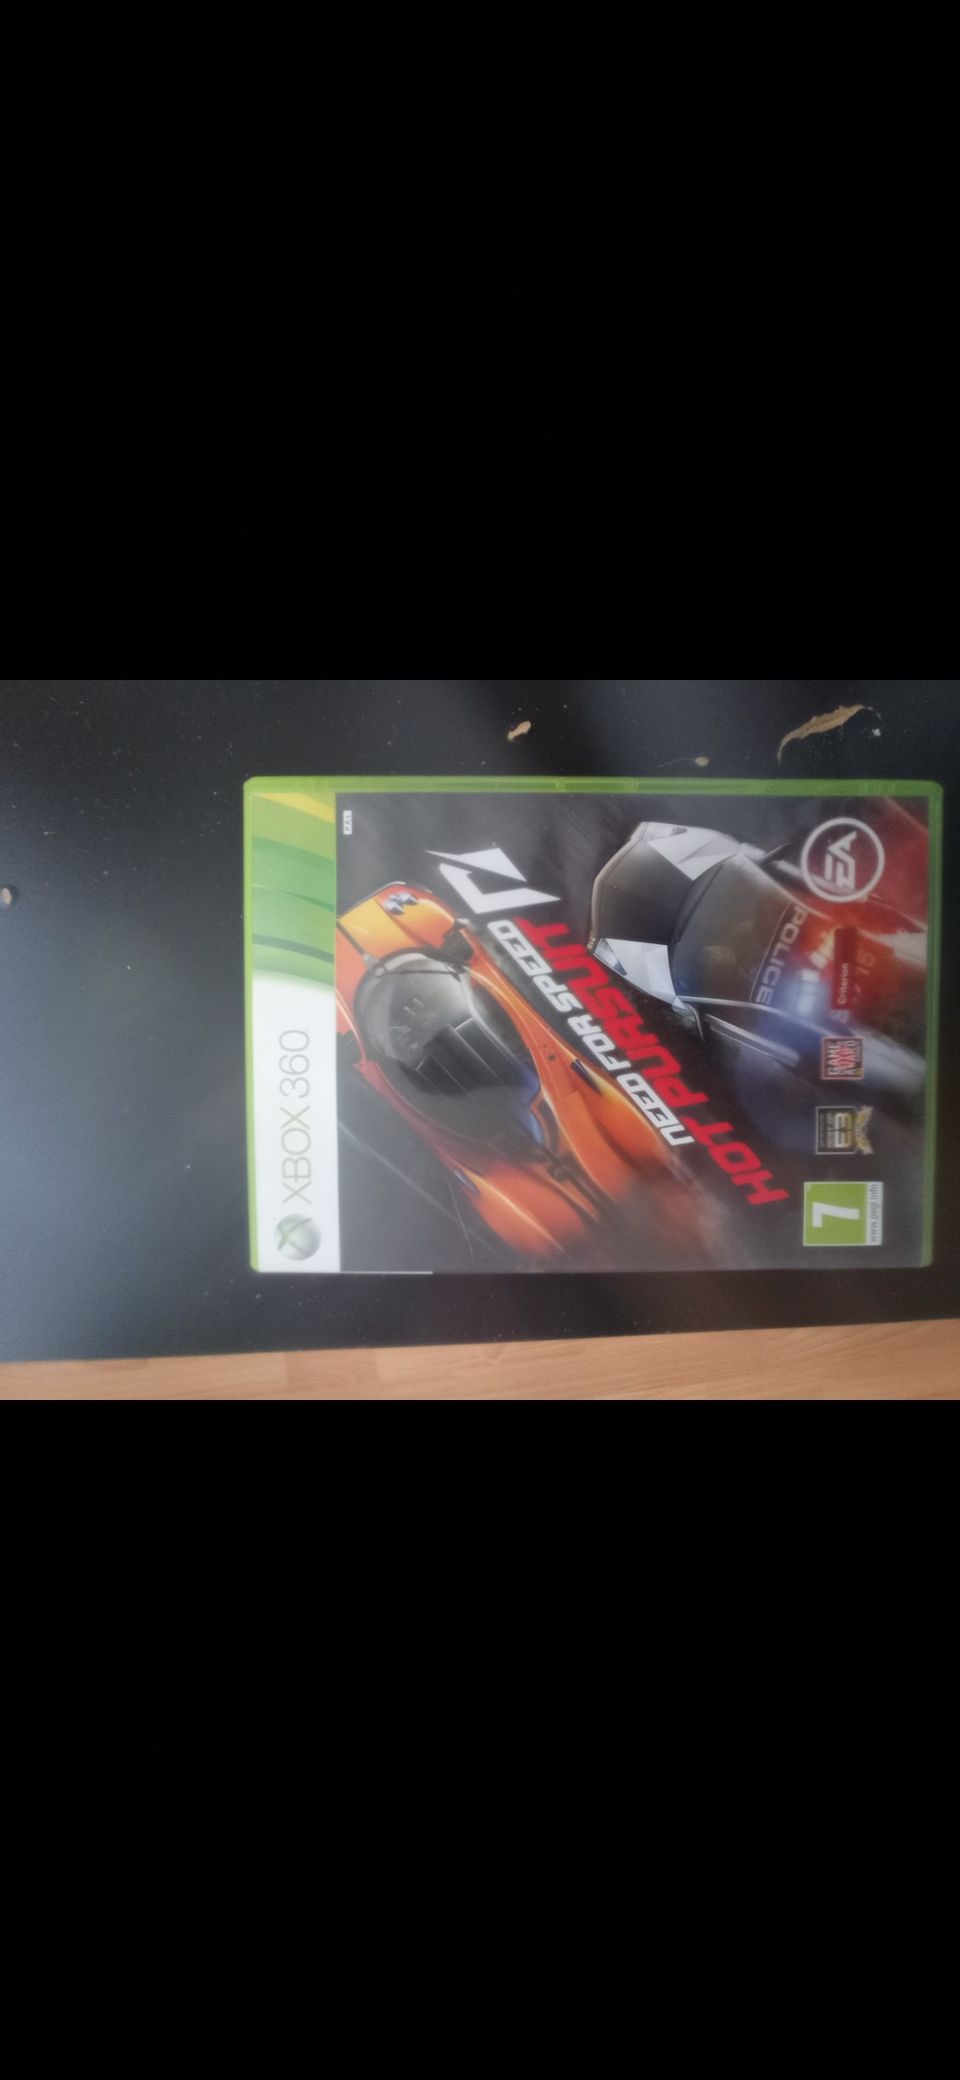 Xbox 360 need For speed hot pursuit